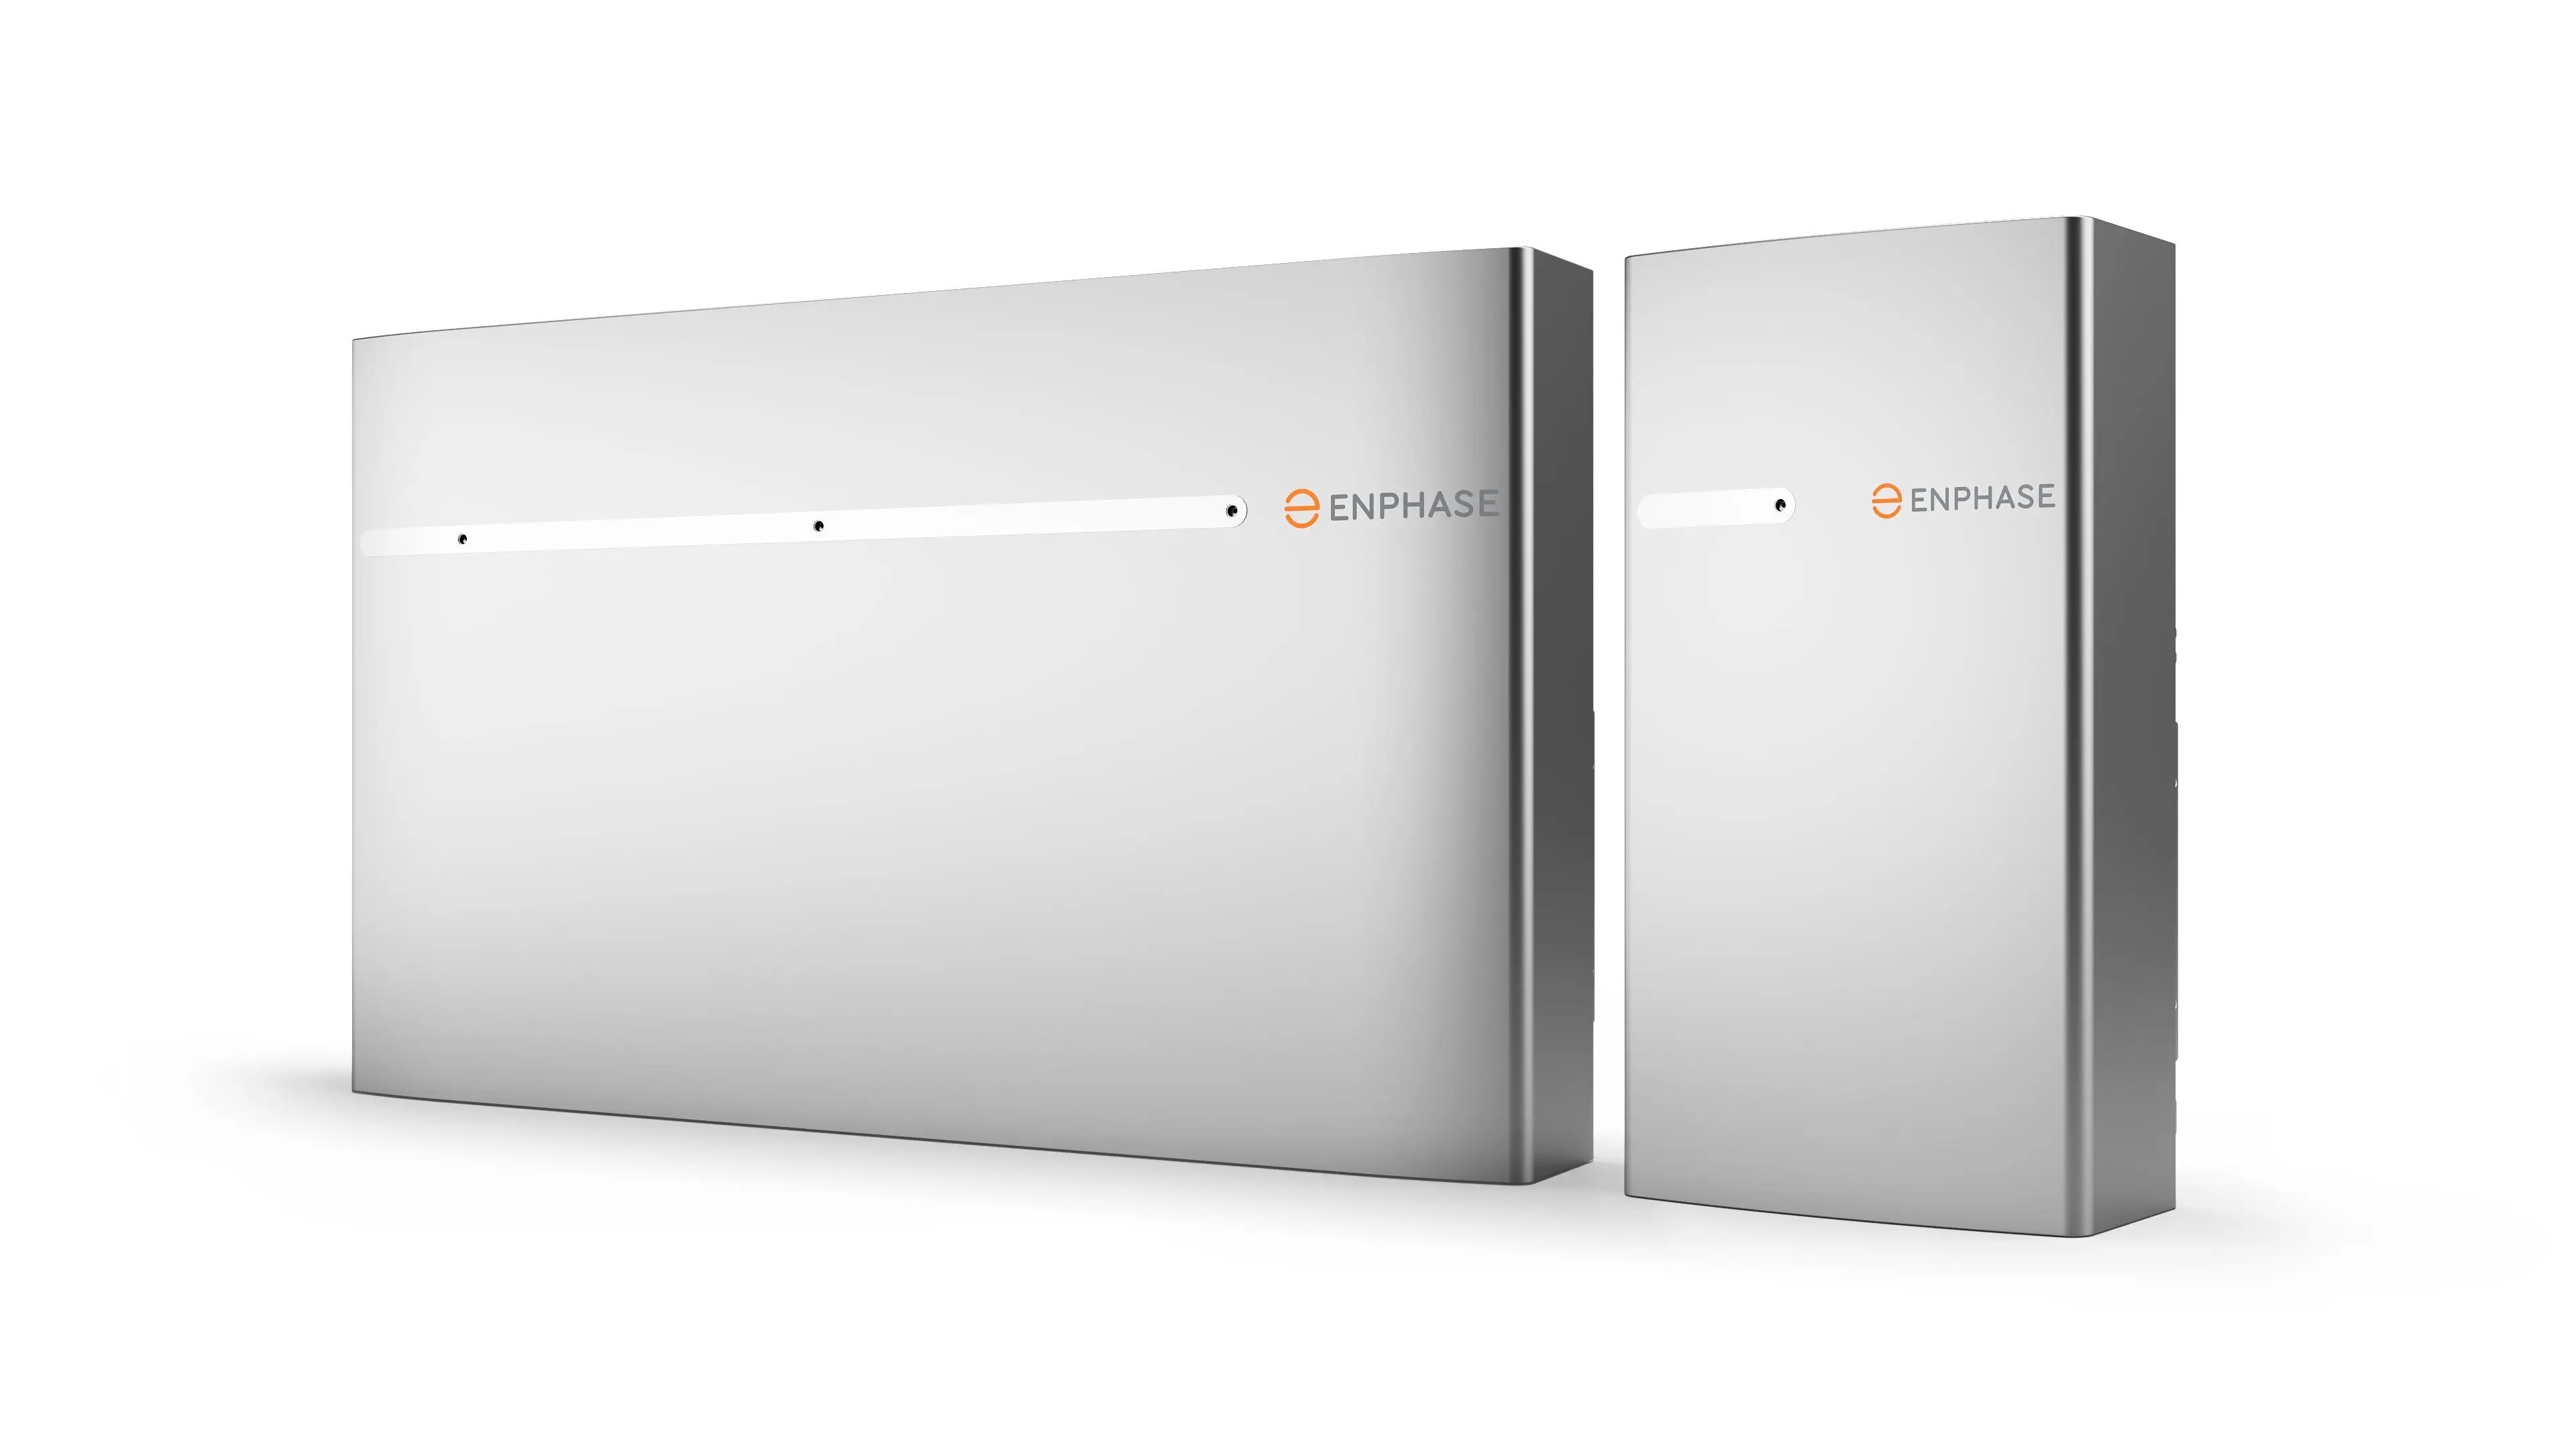 Enphase IQ 10T and Enphase IQ 3T batteries side by side